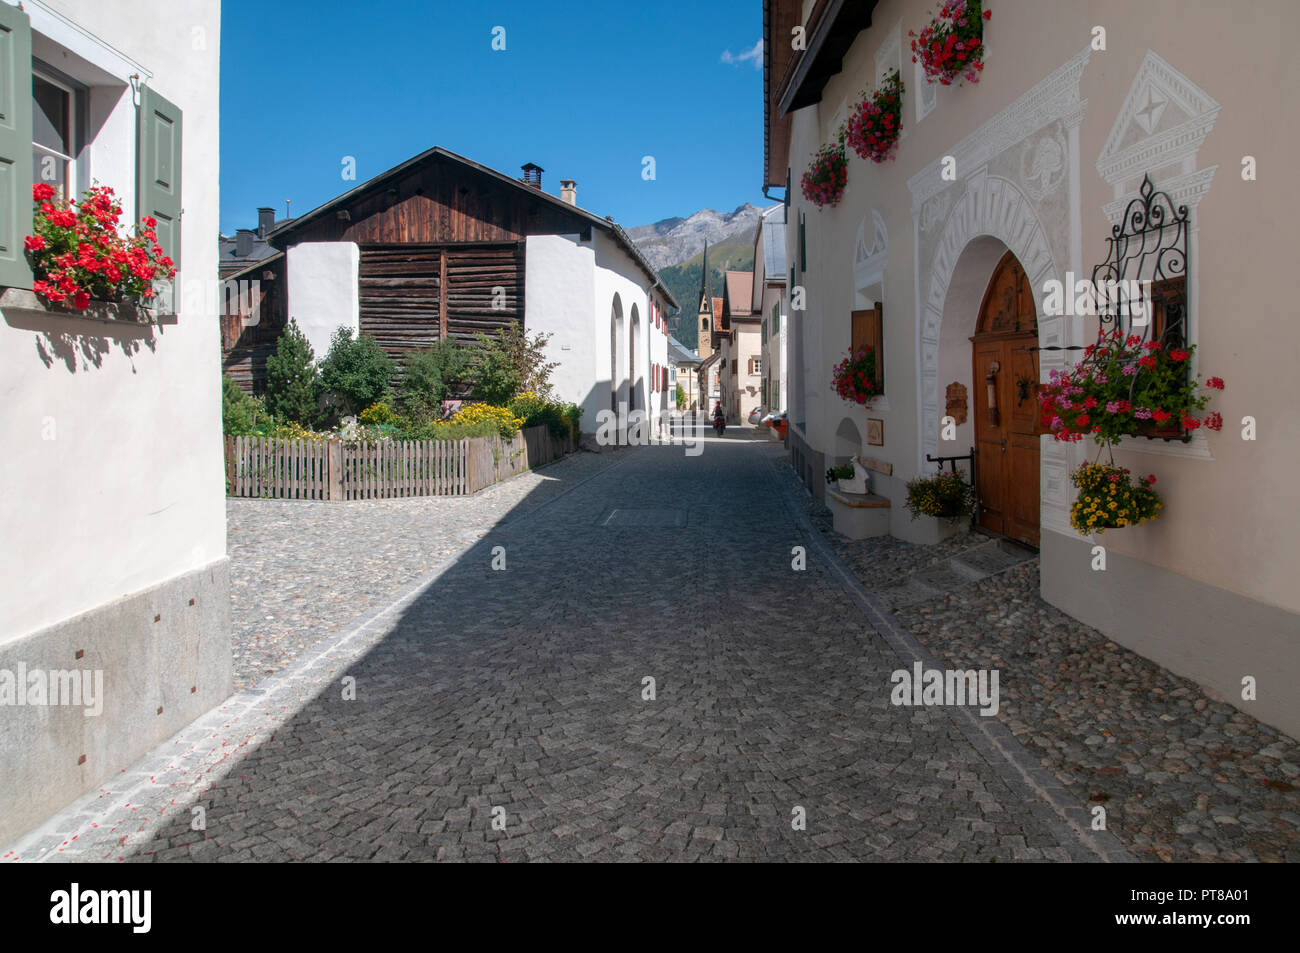 S-chanf is a municipality in the Maloja Region in the Swiss canton of Graubünden. in the Inn Valley Stock Photo